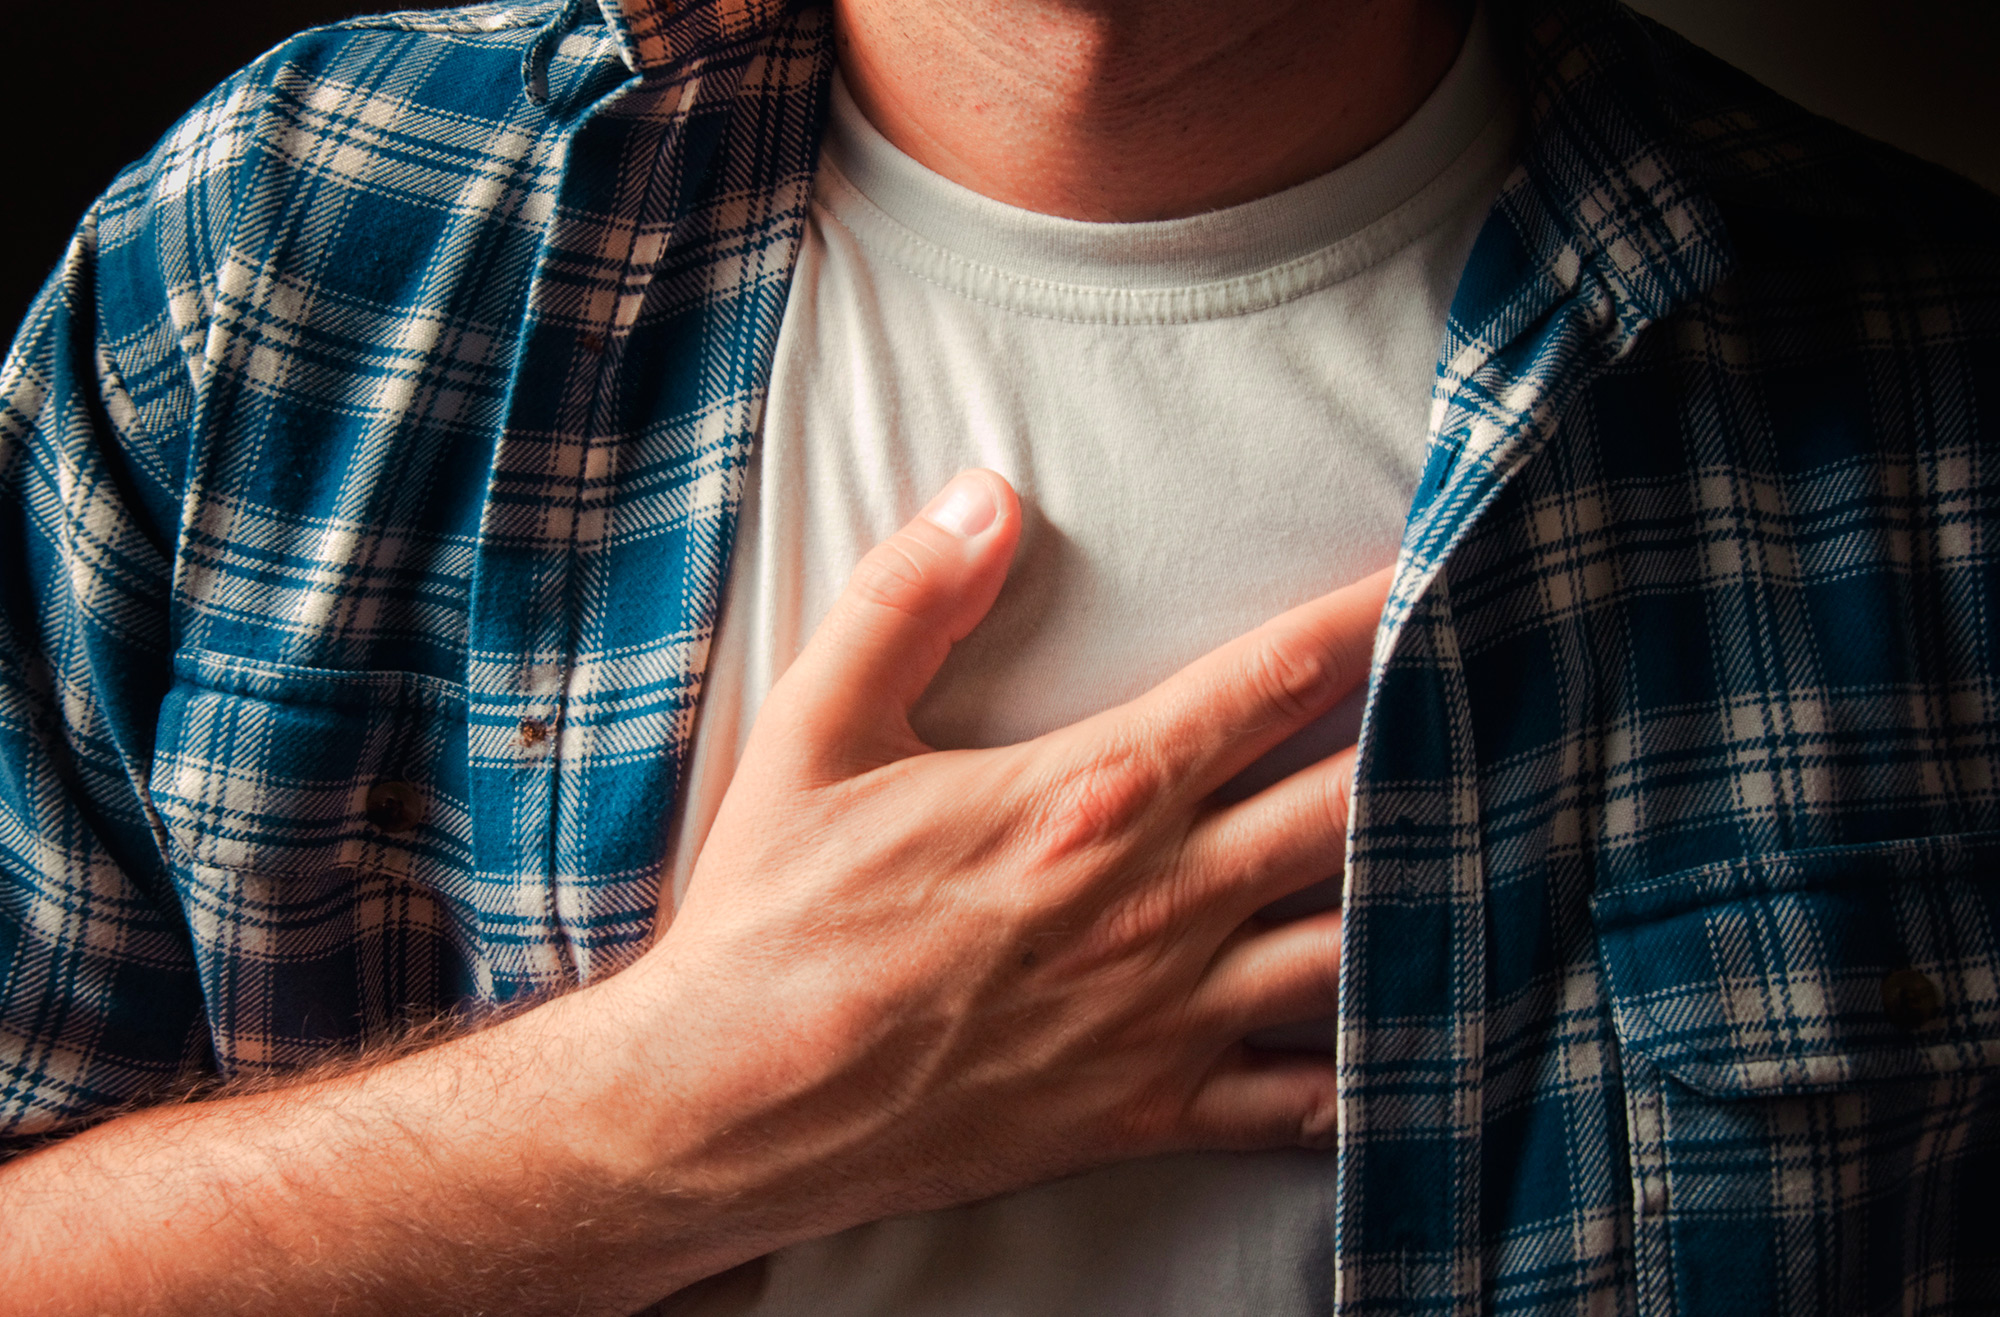 Chest pain in women: Causes, diagnosis, and treatment